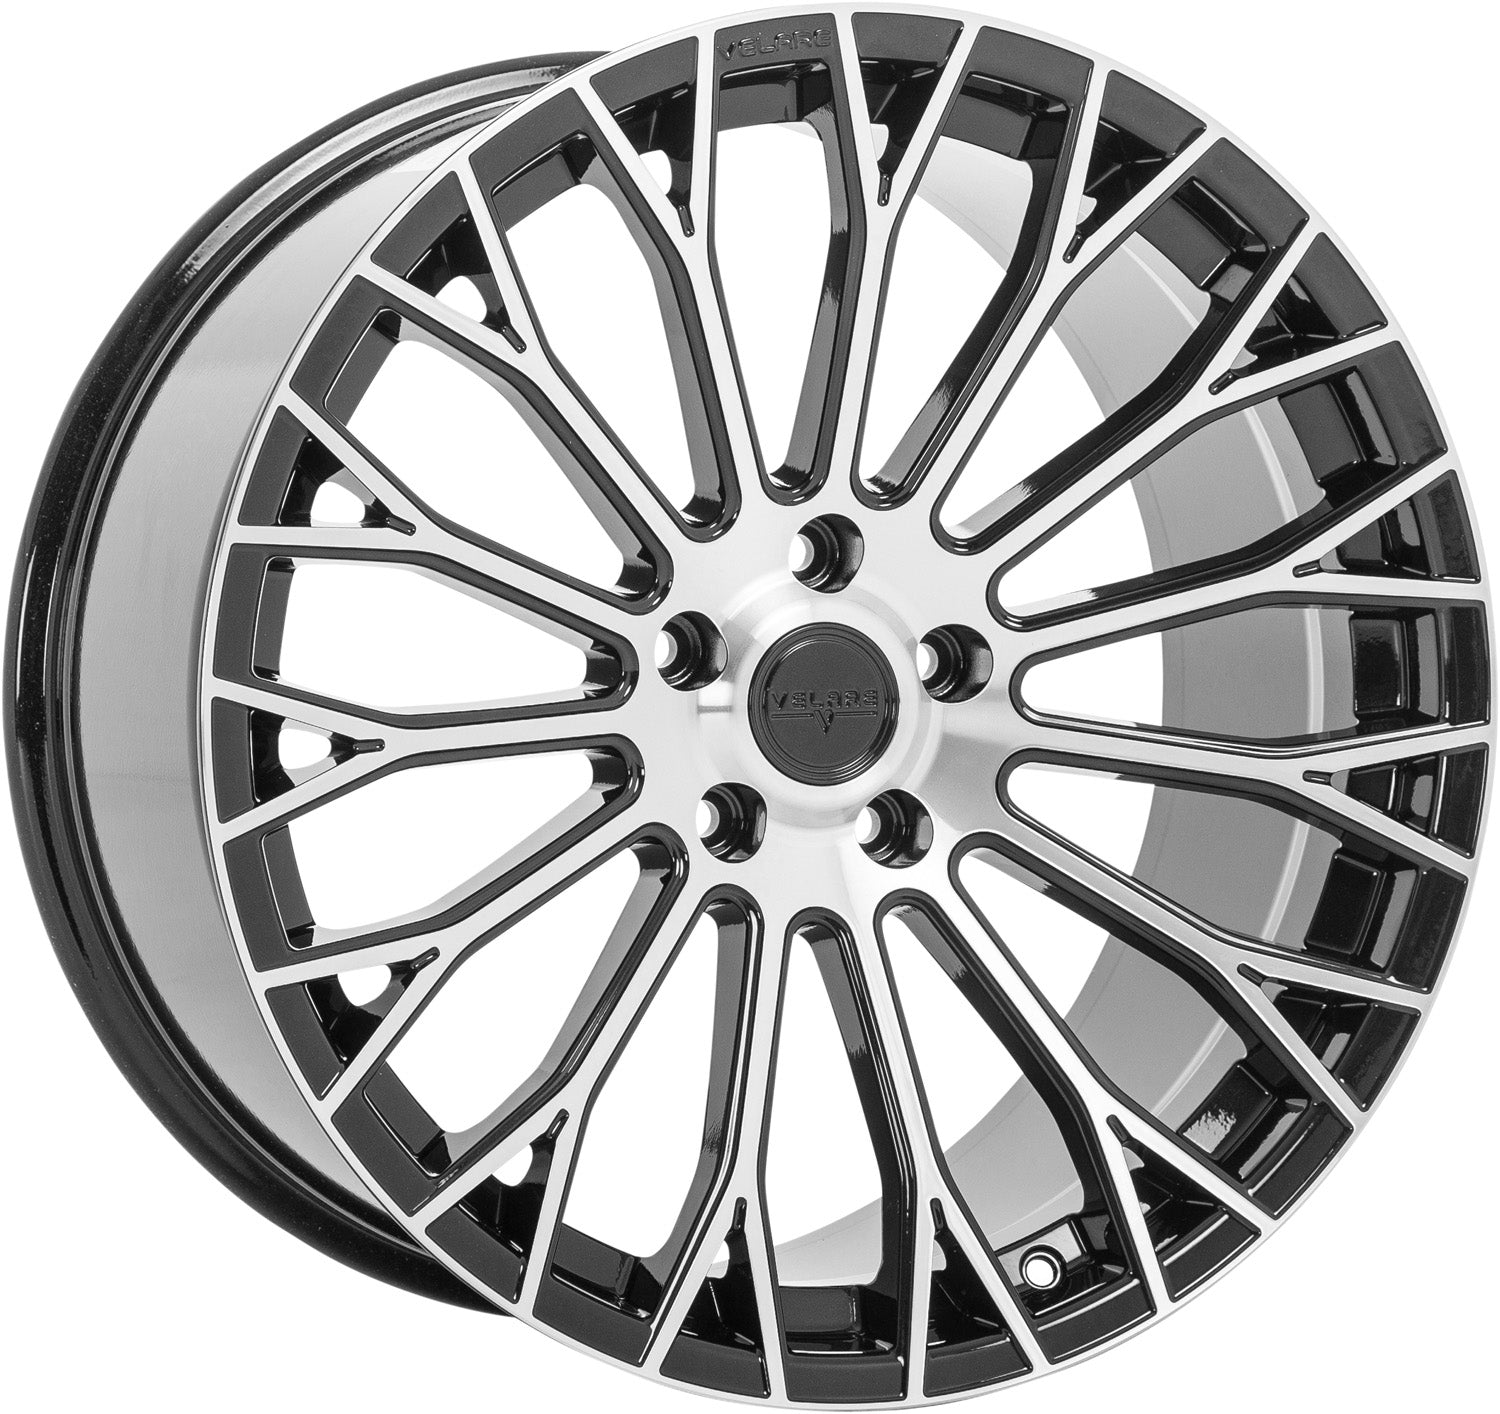 VLR12 Wheel and Tyre Package-Alloy wheels-Velare- DC Leisure